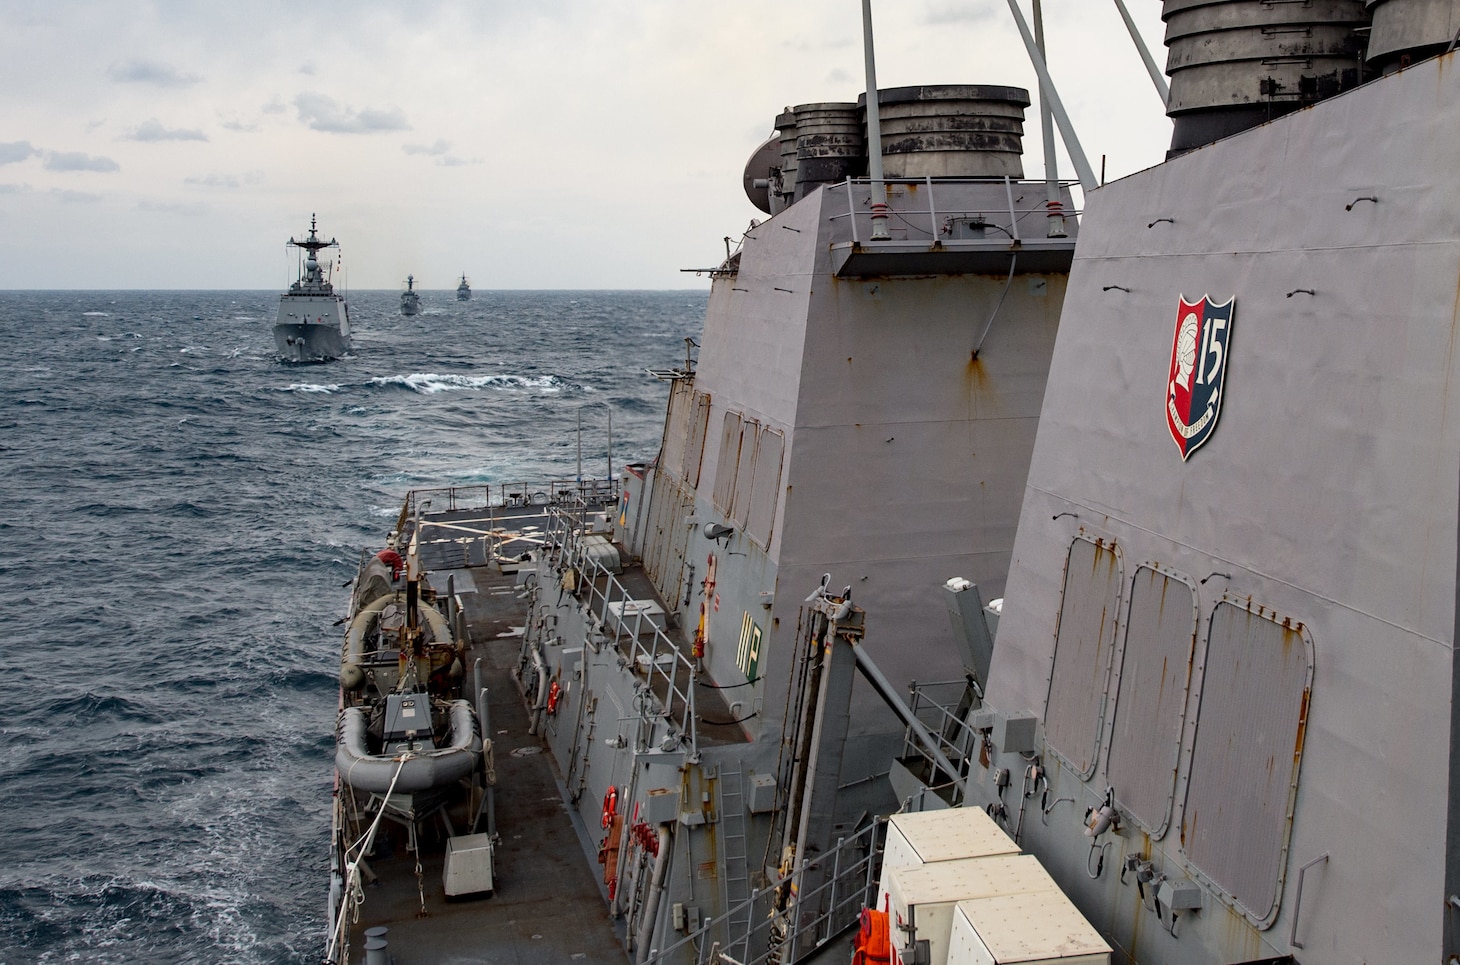 WATERS EAST OF THE KOREAN PENINSULA (Oct. 18, 2017) The forward-deployed Arleigh Burke-class guided-missile destroyer USS Stethem (DDG 63) steams in formation with Republic of Korea (ROK) Navy ships ROKS Munmu the Great (DDH-976), ROKS Kang Won (DD-922) and ROKS Yang Manchun (DDH-973) during Maritime Counter Special Operations Force Exercise 2017.  Stethem, part of Carrier Strike Group 5, is conducting a bilateral training exercise with the ROK Navy designed to increase the readiness of U.S. and ROK forces and maintain stability on the Korean Peninsula.